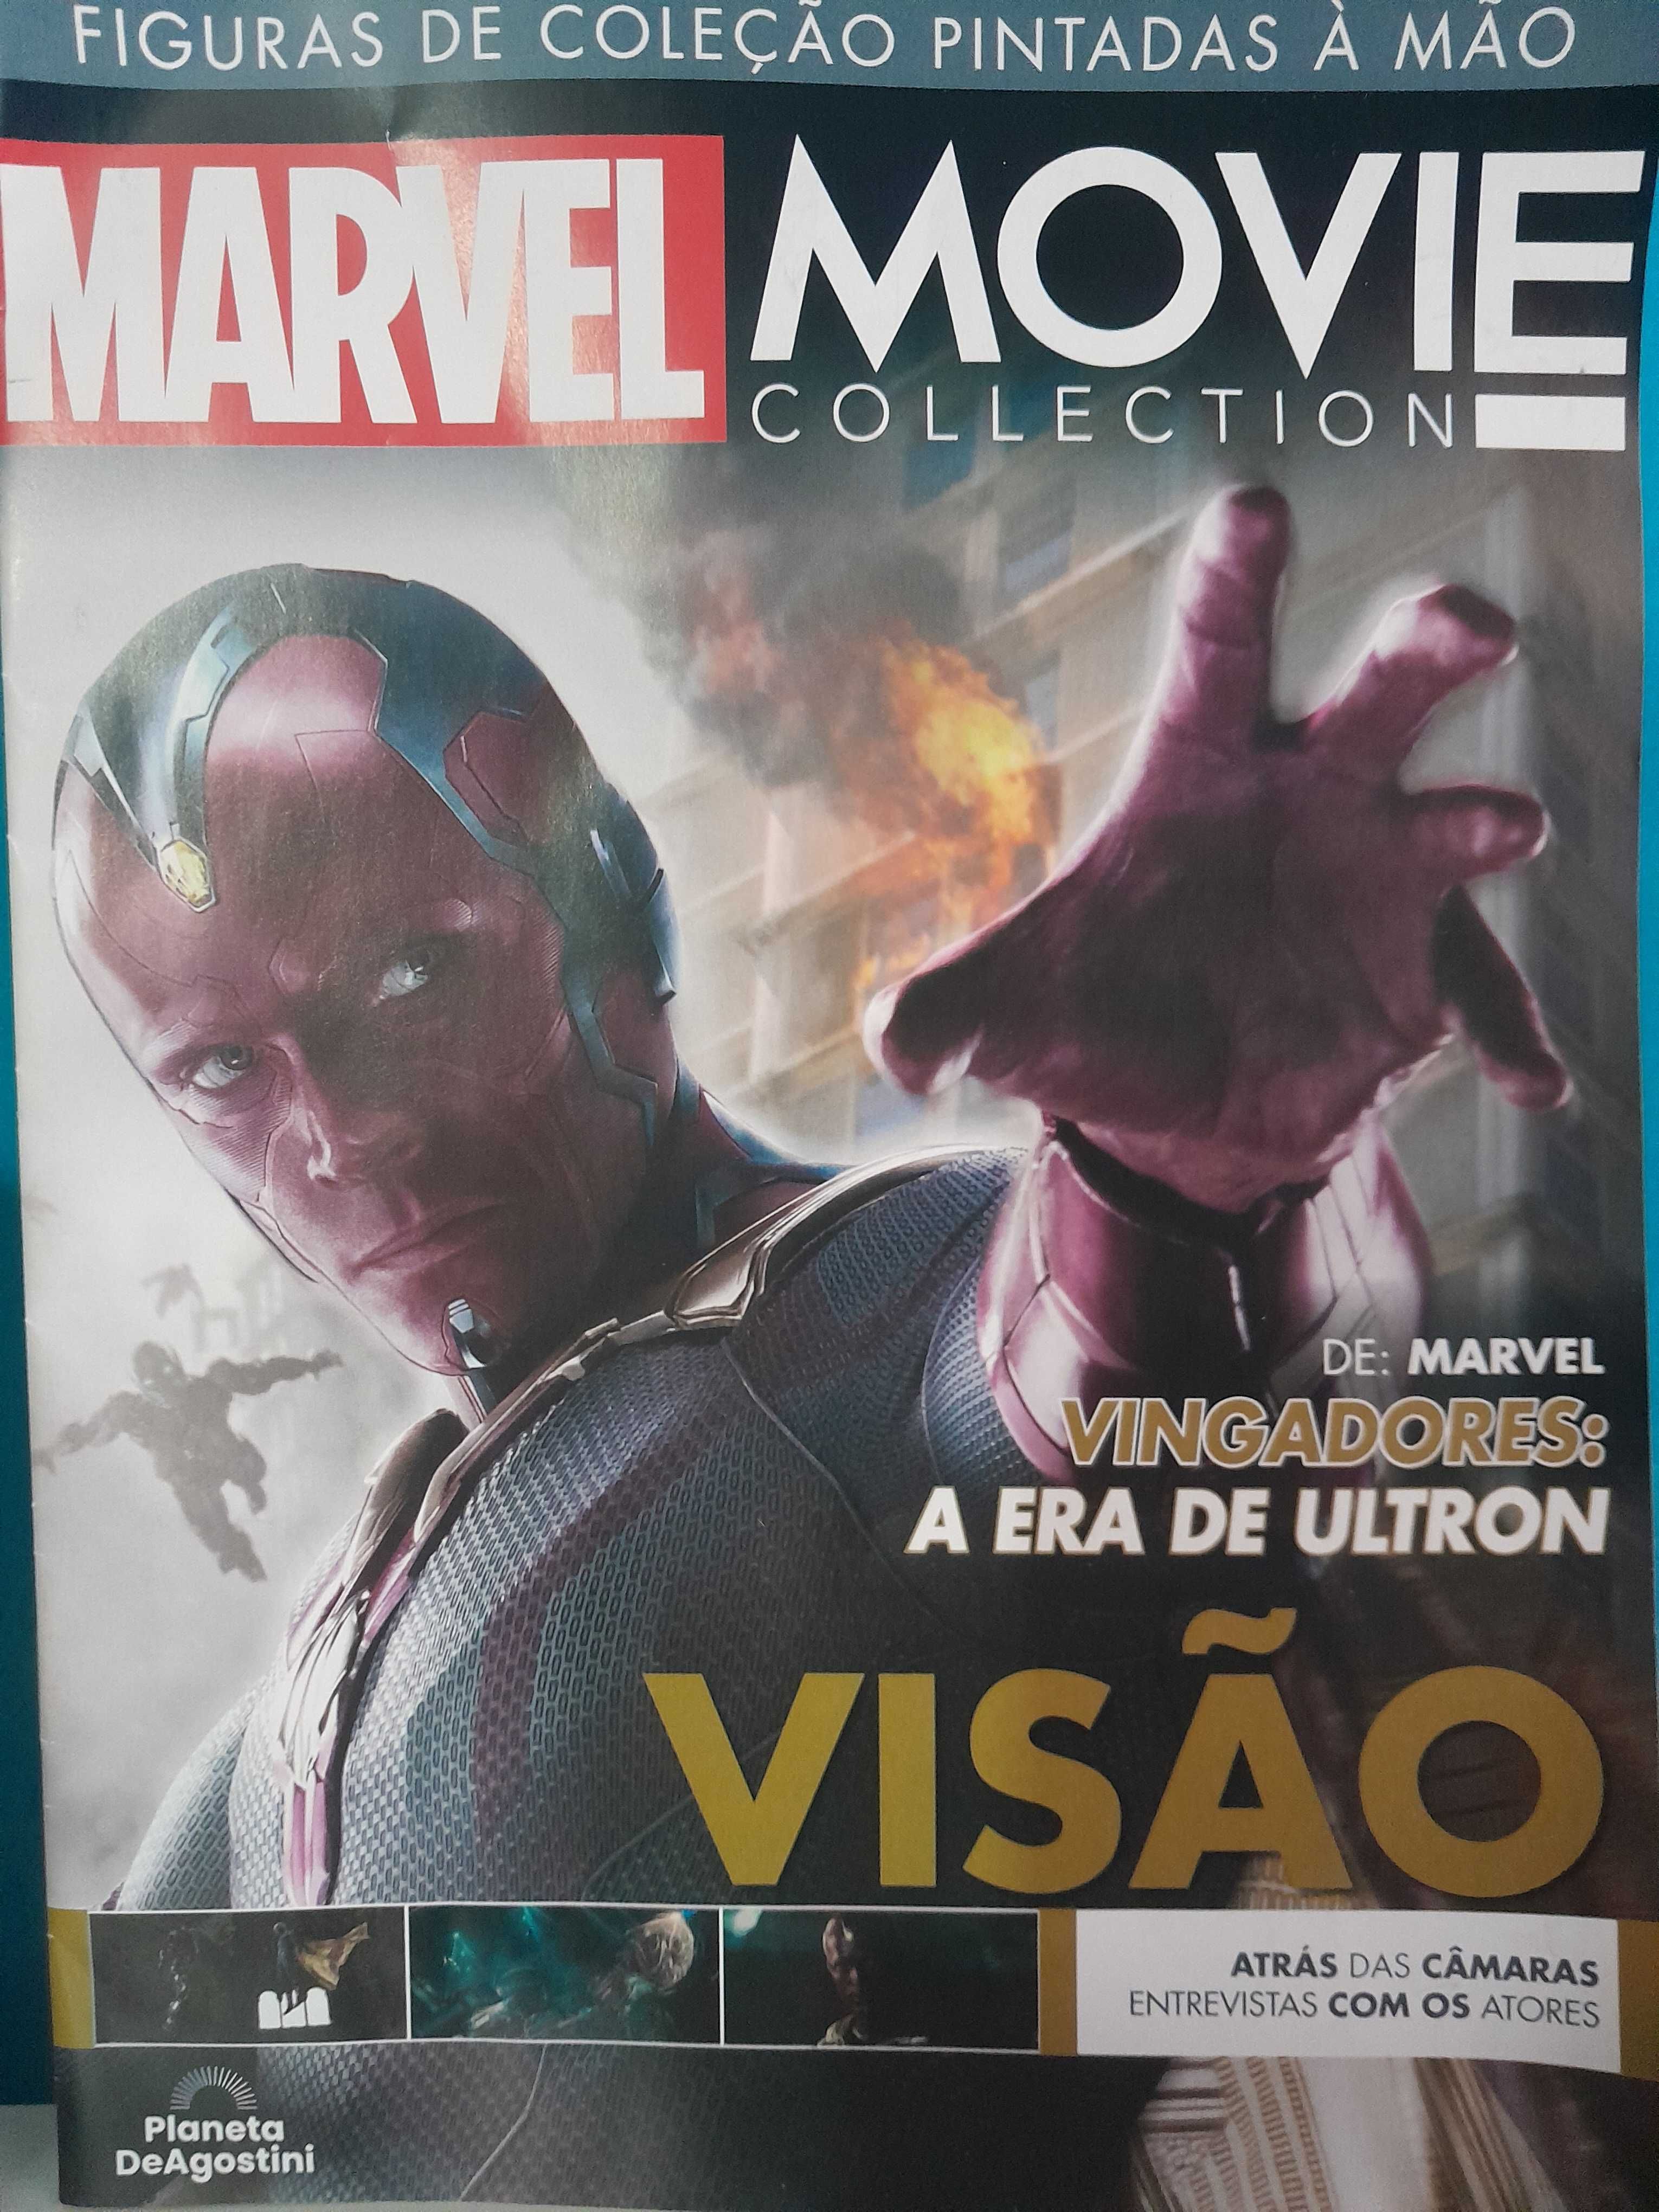 Marvel movie collection vision